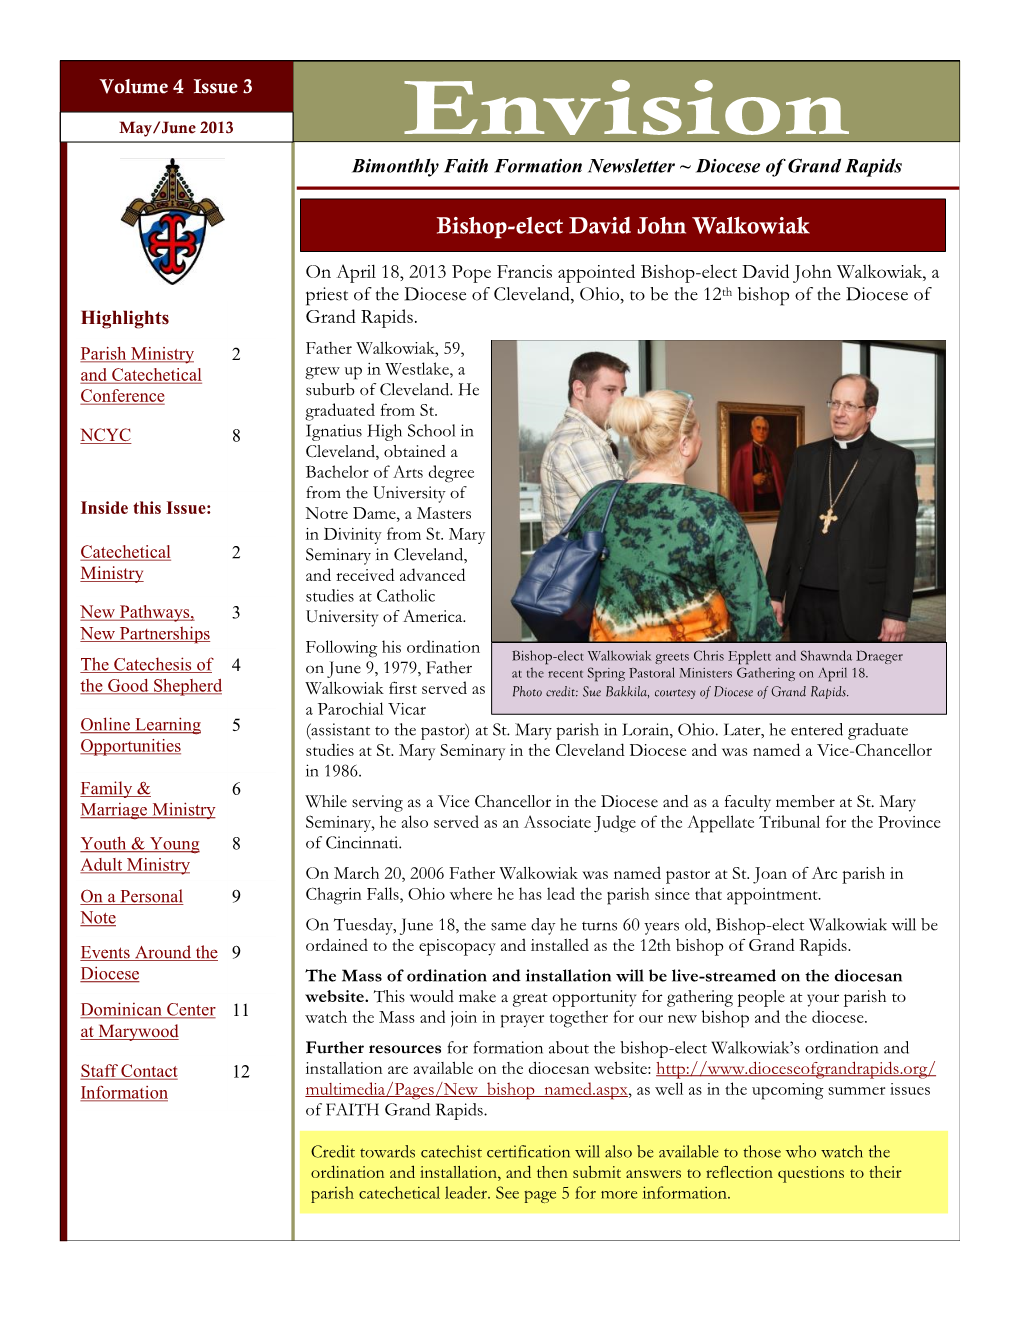 Envision Bimonthly Faith Formation Newsletter ~ Diocese of Grand Rapids